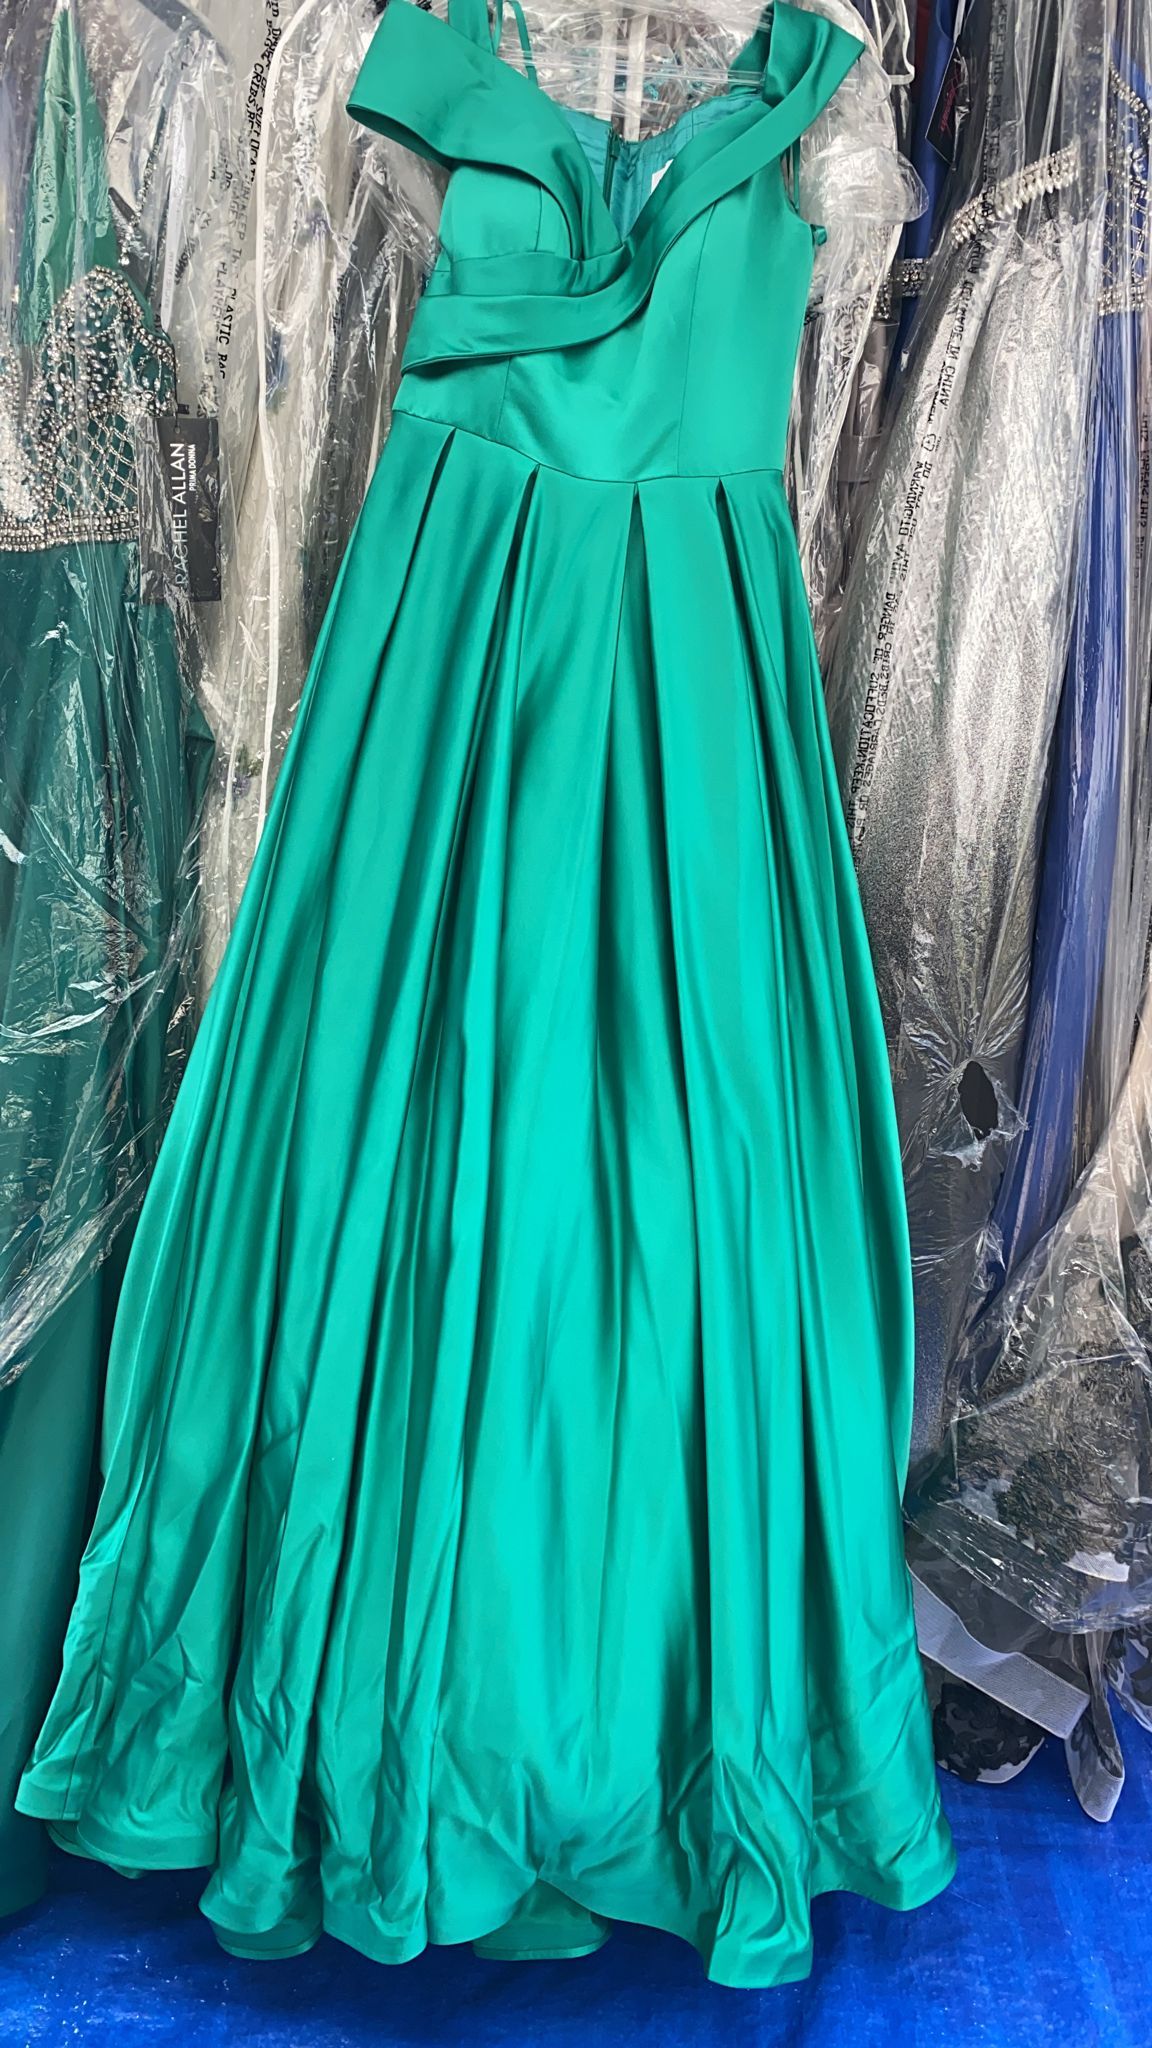 Style 1343 Ashley Lauren Size 6 Off The Shoulder Satin Green A-line Dress on Queenly